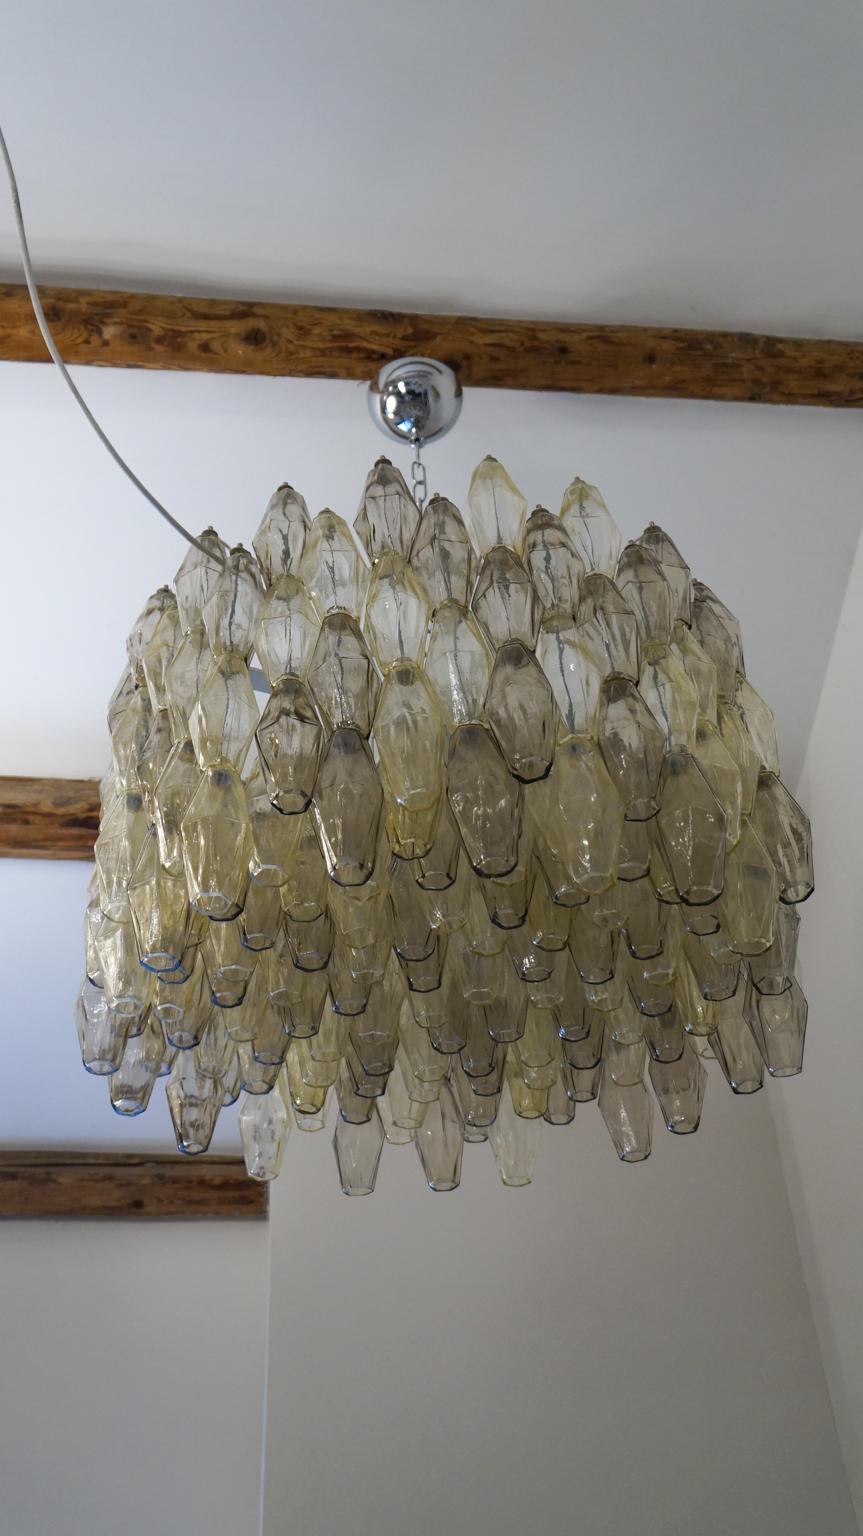 Murano blown glass Poliedri chandelier, with two color elements, grey and amber.
This fantastic chandelier contains a total of 192 elements called Poliedri.

This Classic developed in the 1960s and then reproduced by Maestro Alberto Donà in